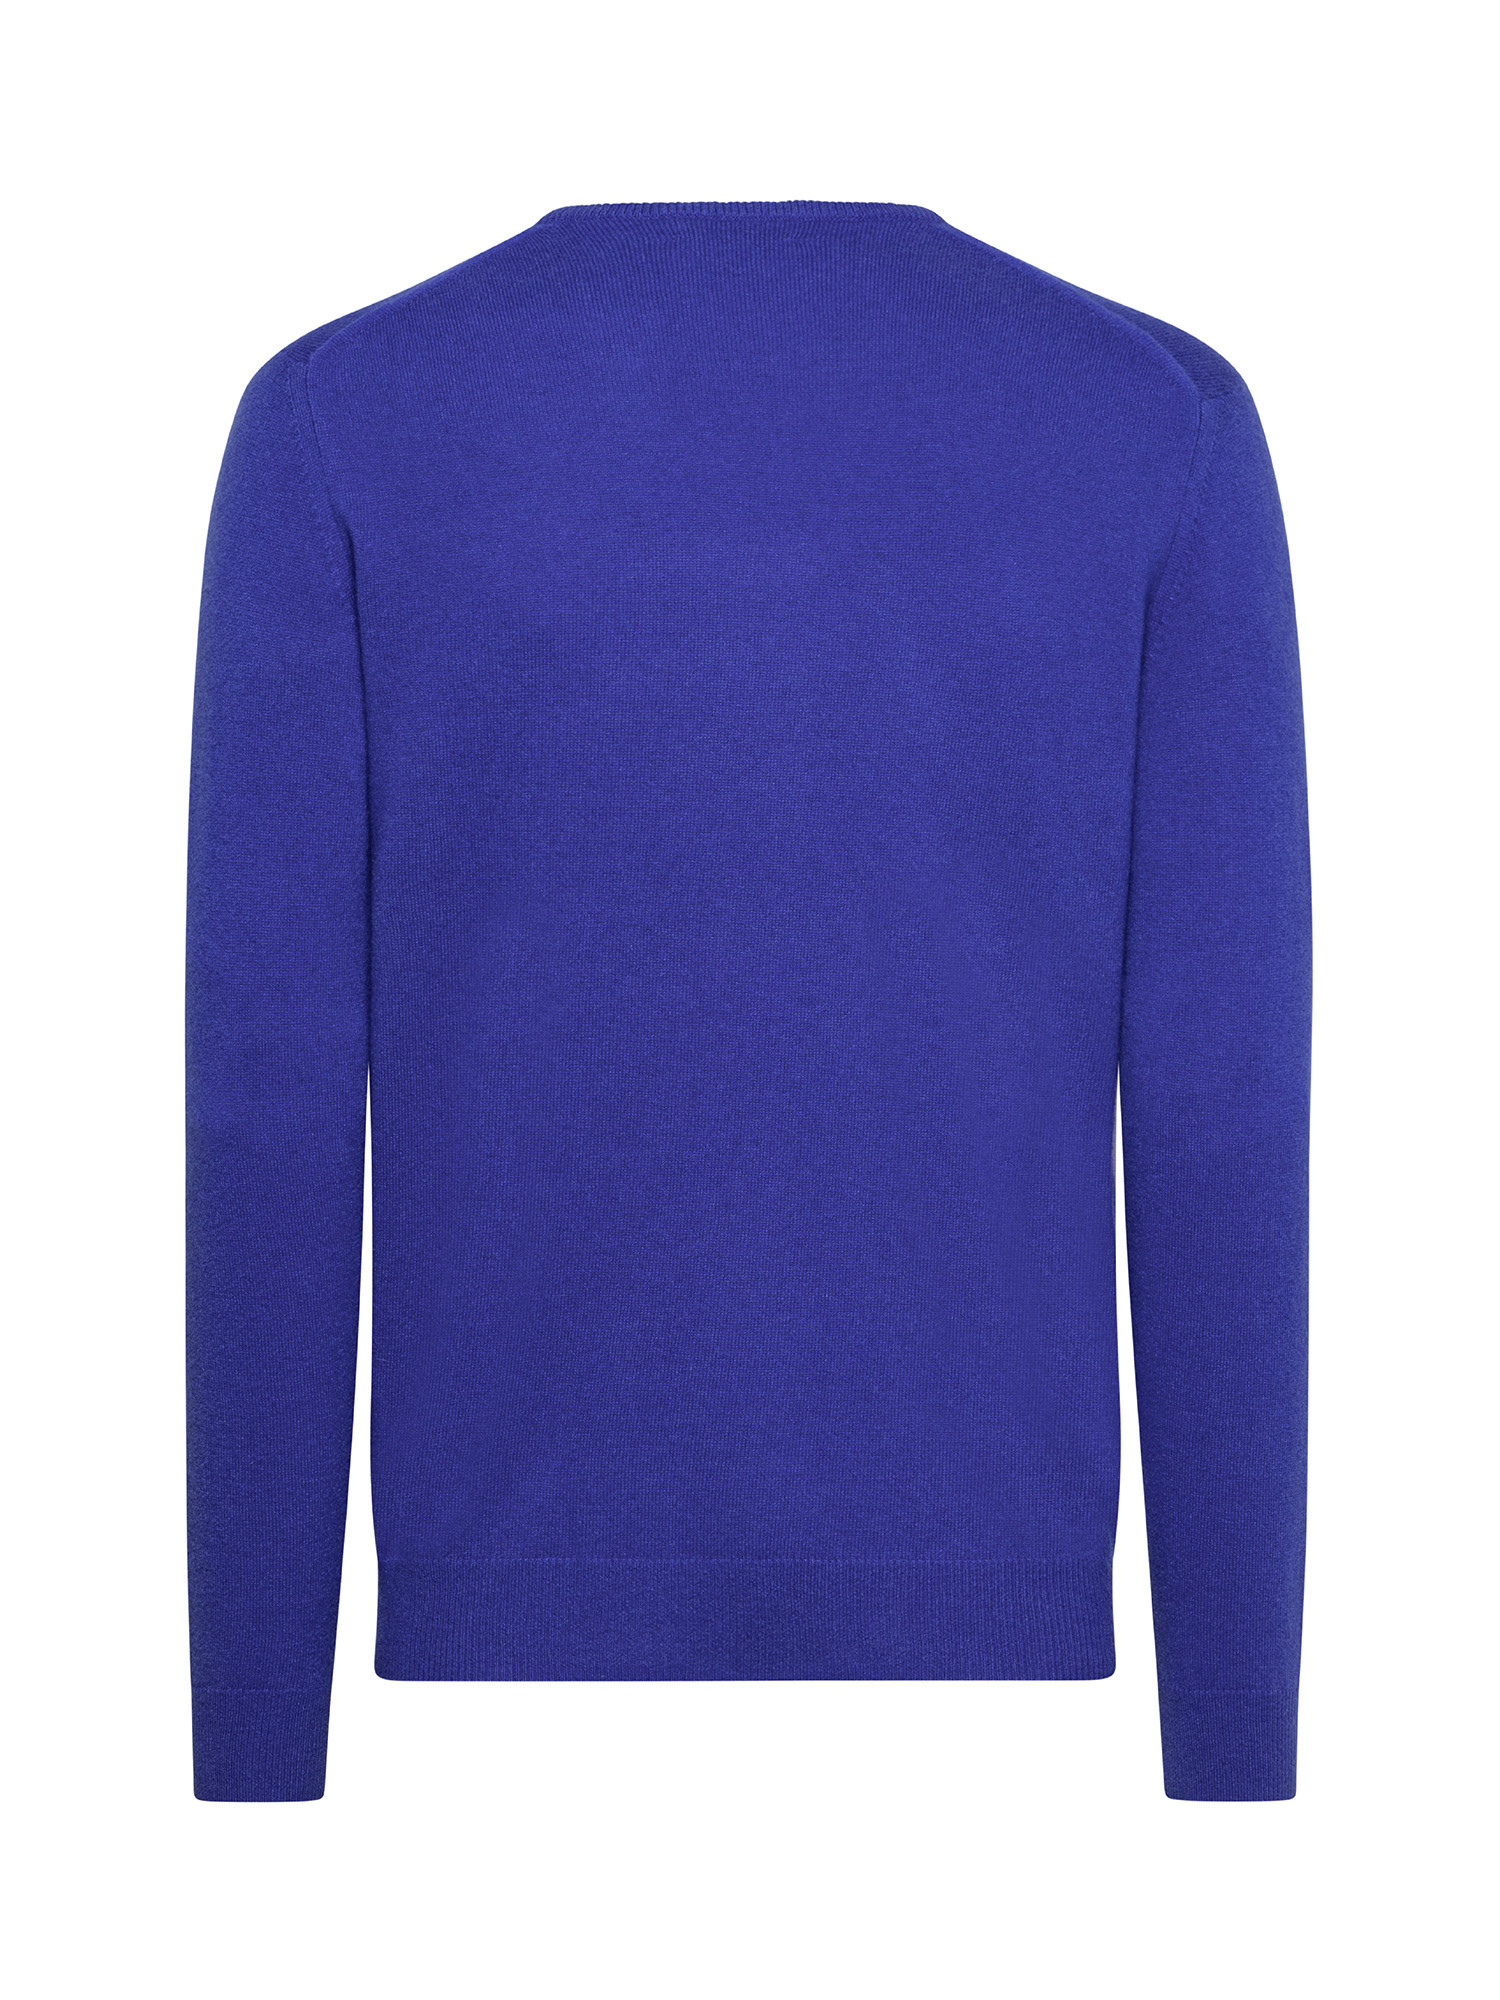 Pullover girocollo in puro cashmere, Blu, large image number 1